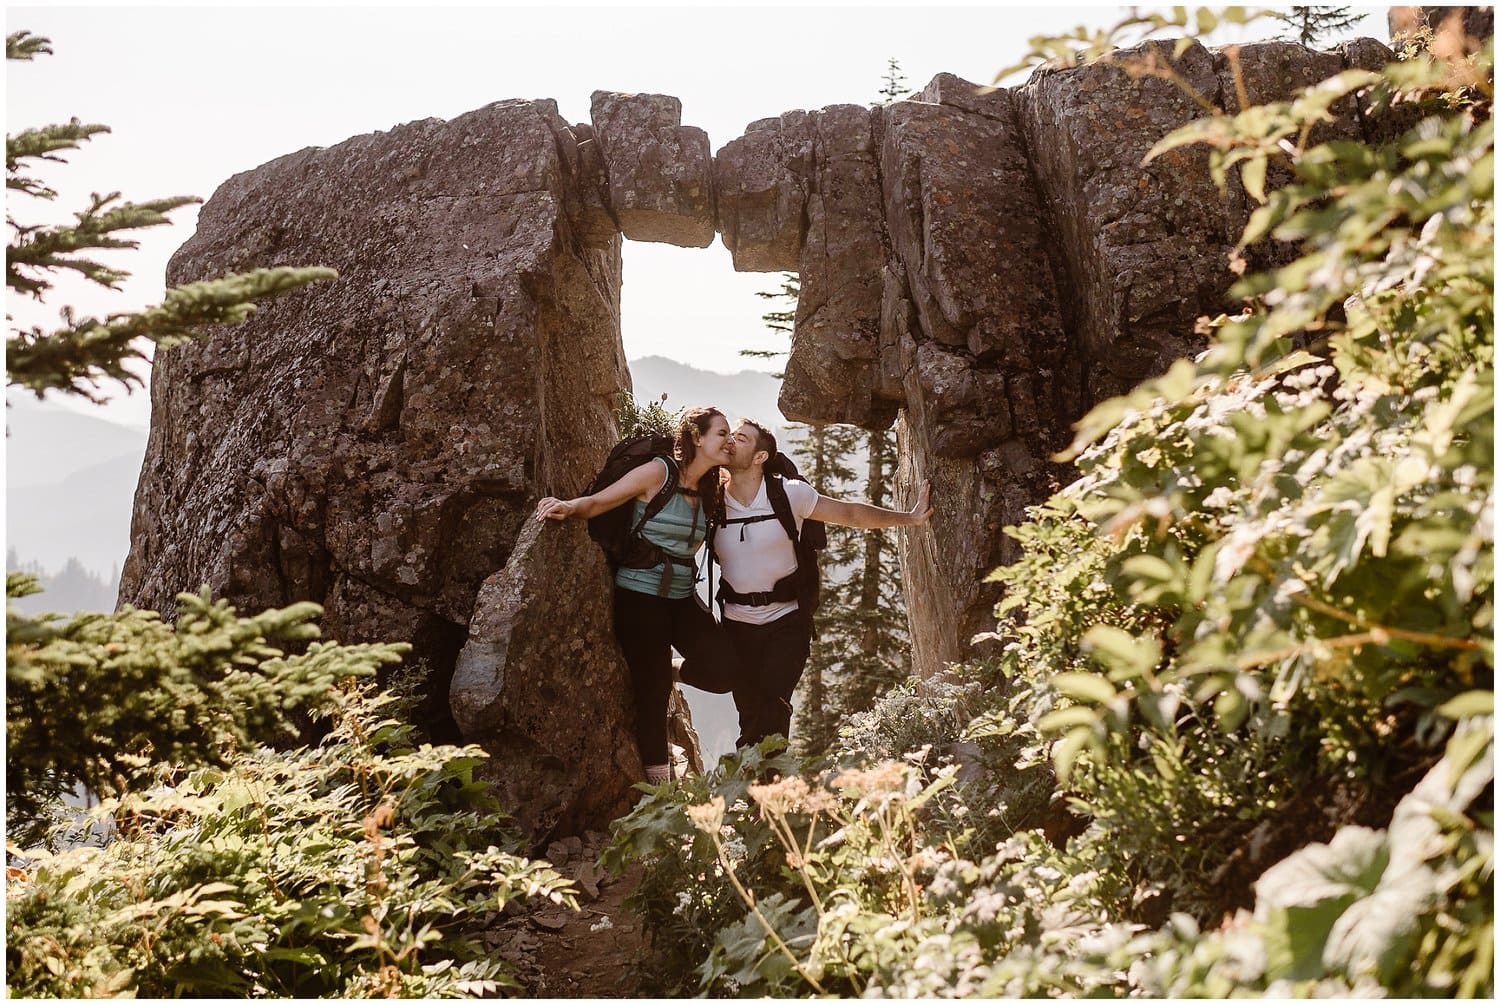 Bride and groom standing underneath a rock formation while hiking in Washington. The groom is kissing the bride's cheek.